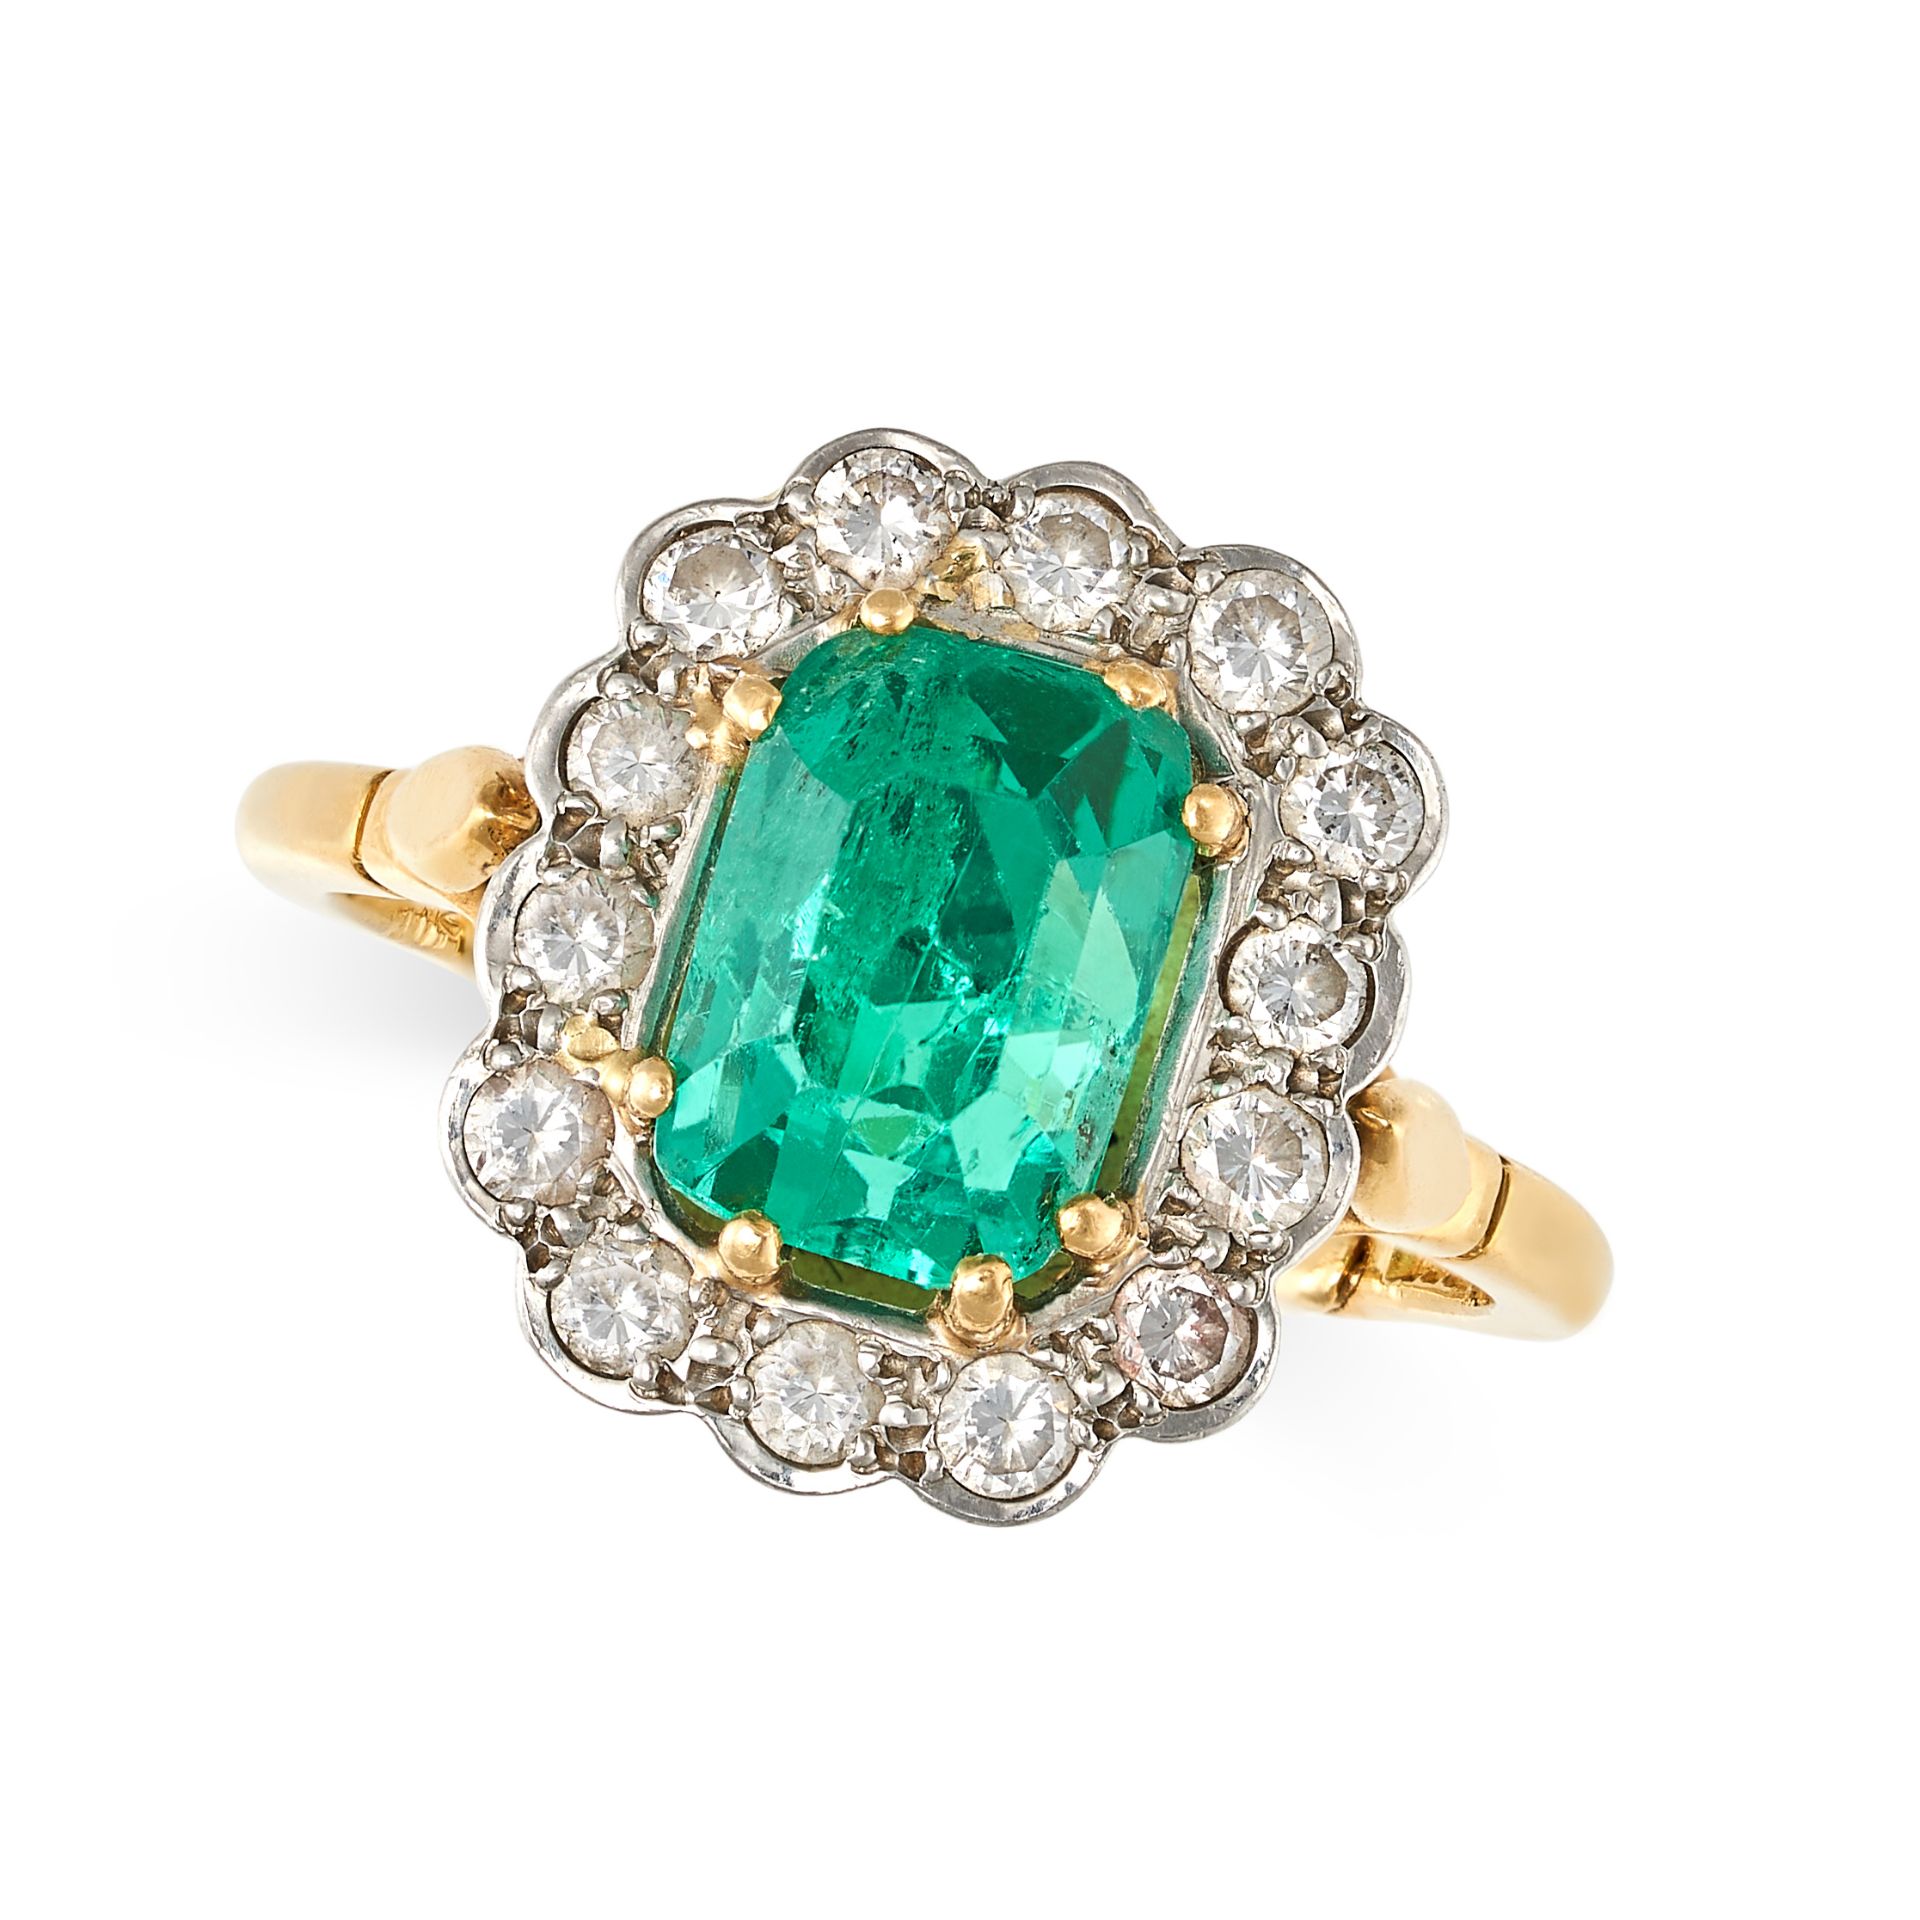 A COLOMBIAN EMERALD AND DIAMOND CLUSTER RING in 18ct yellow and white gold, set with an octagonal...